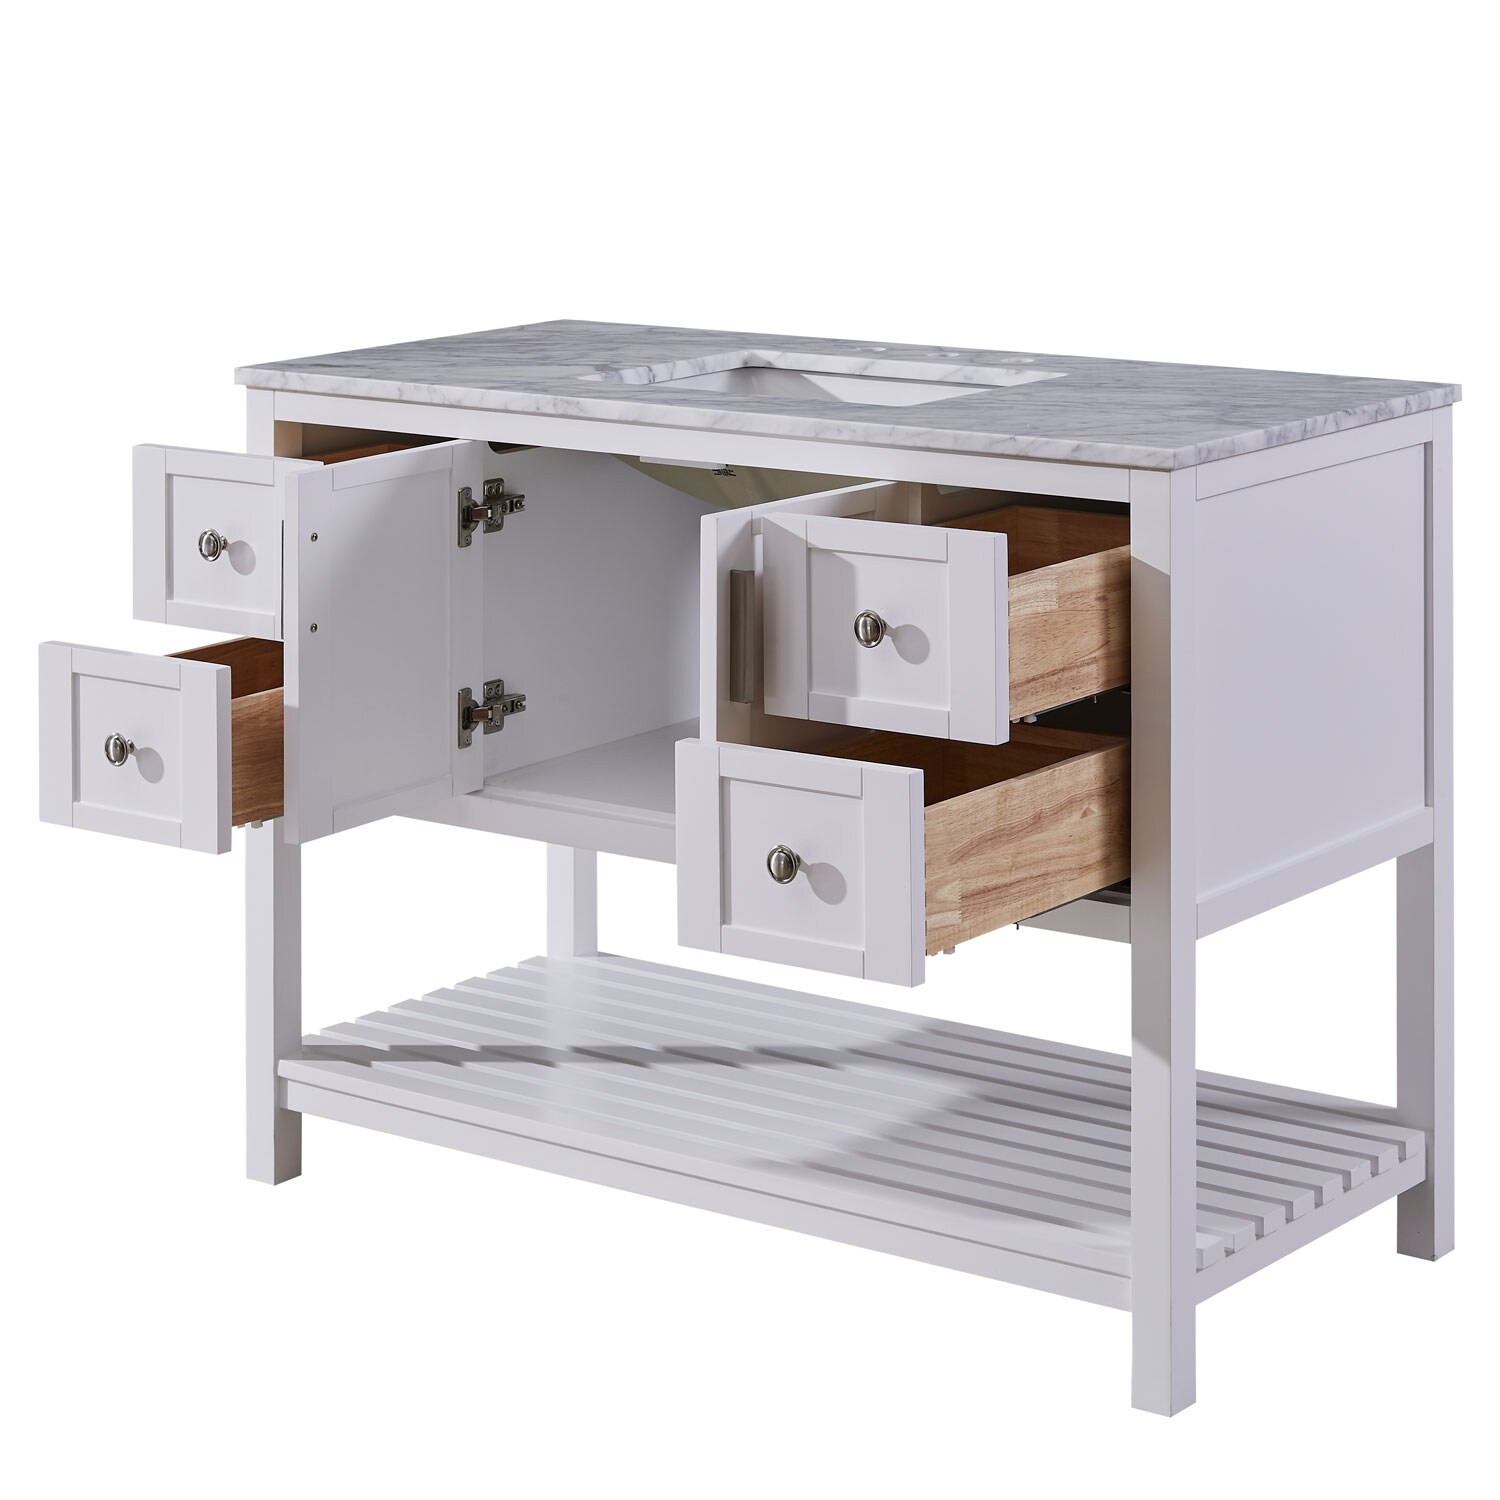 Silkroad Exclusive 48 In White Undermount Single Sink Bathroom Vanity With Carrara White Natural